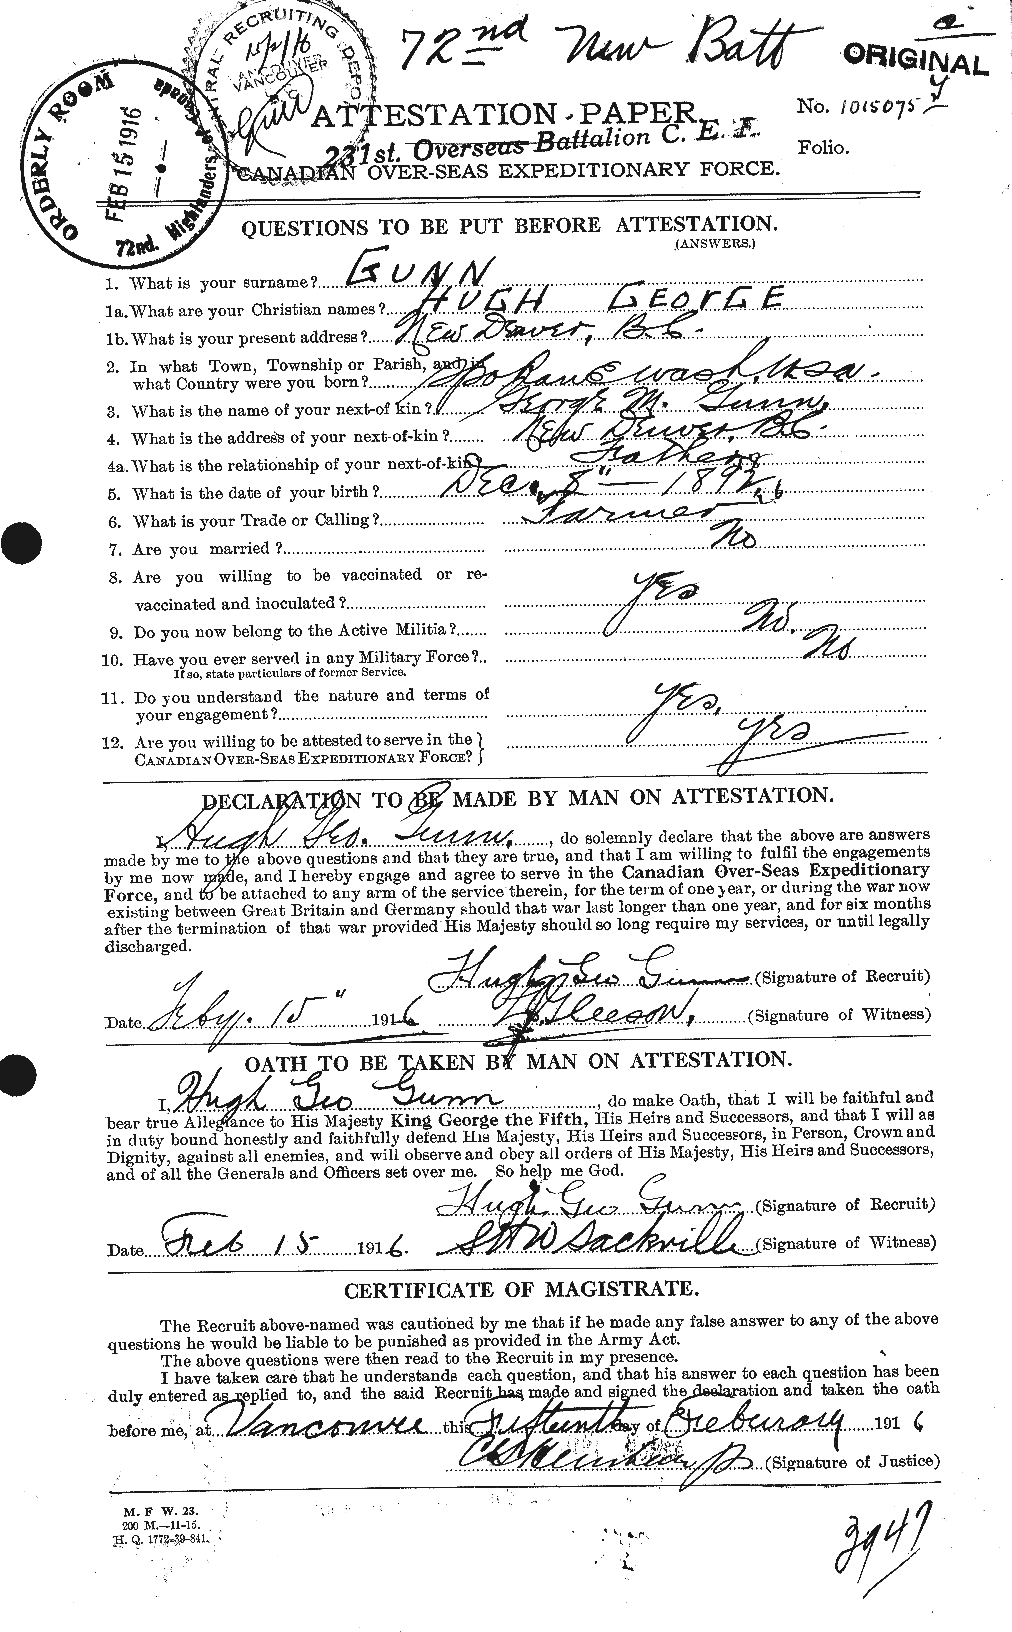 Personnel Records of the First World War - CEF 369263a